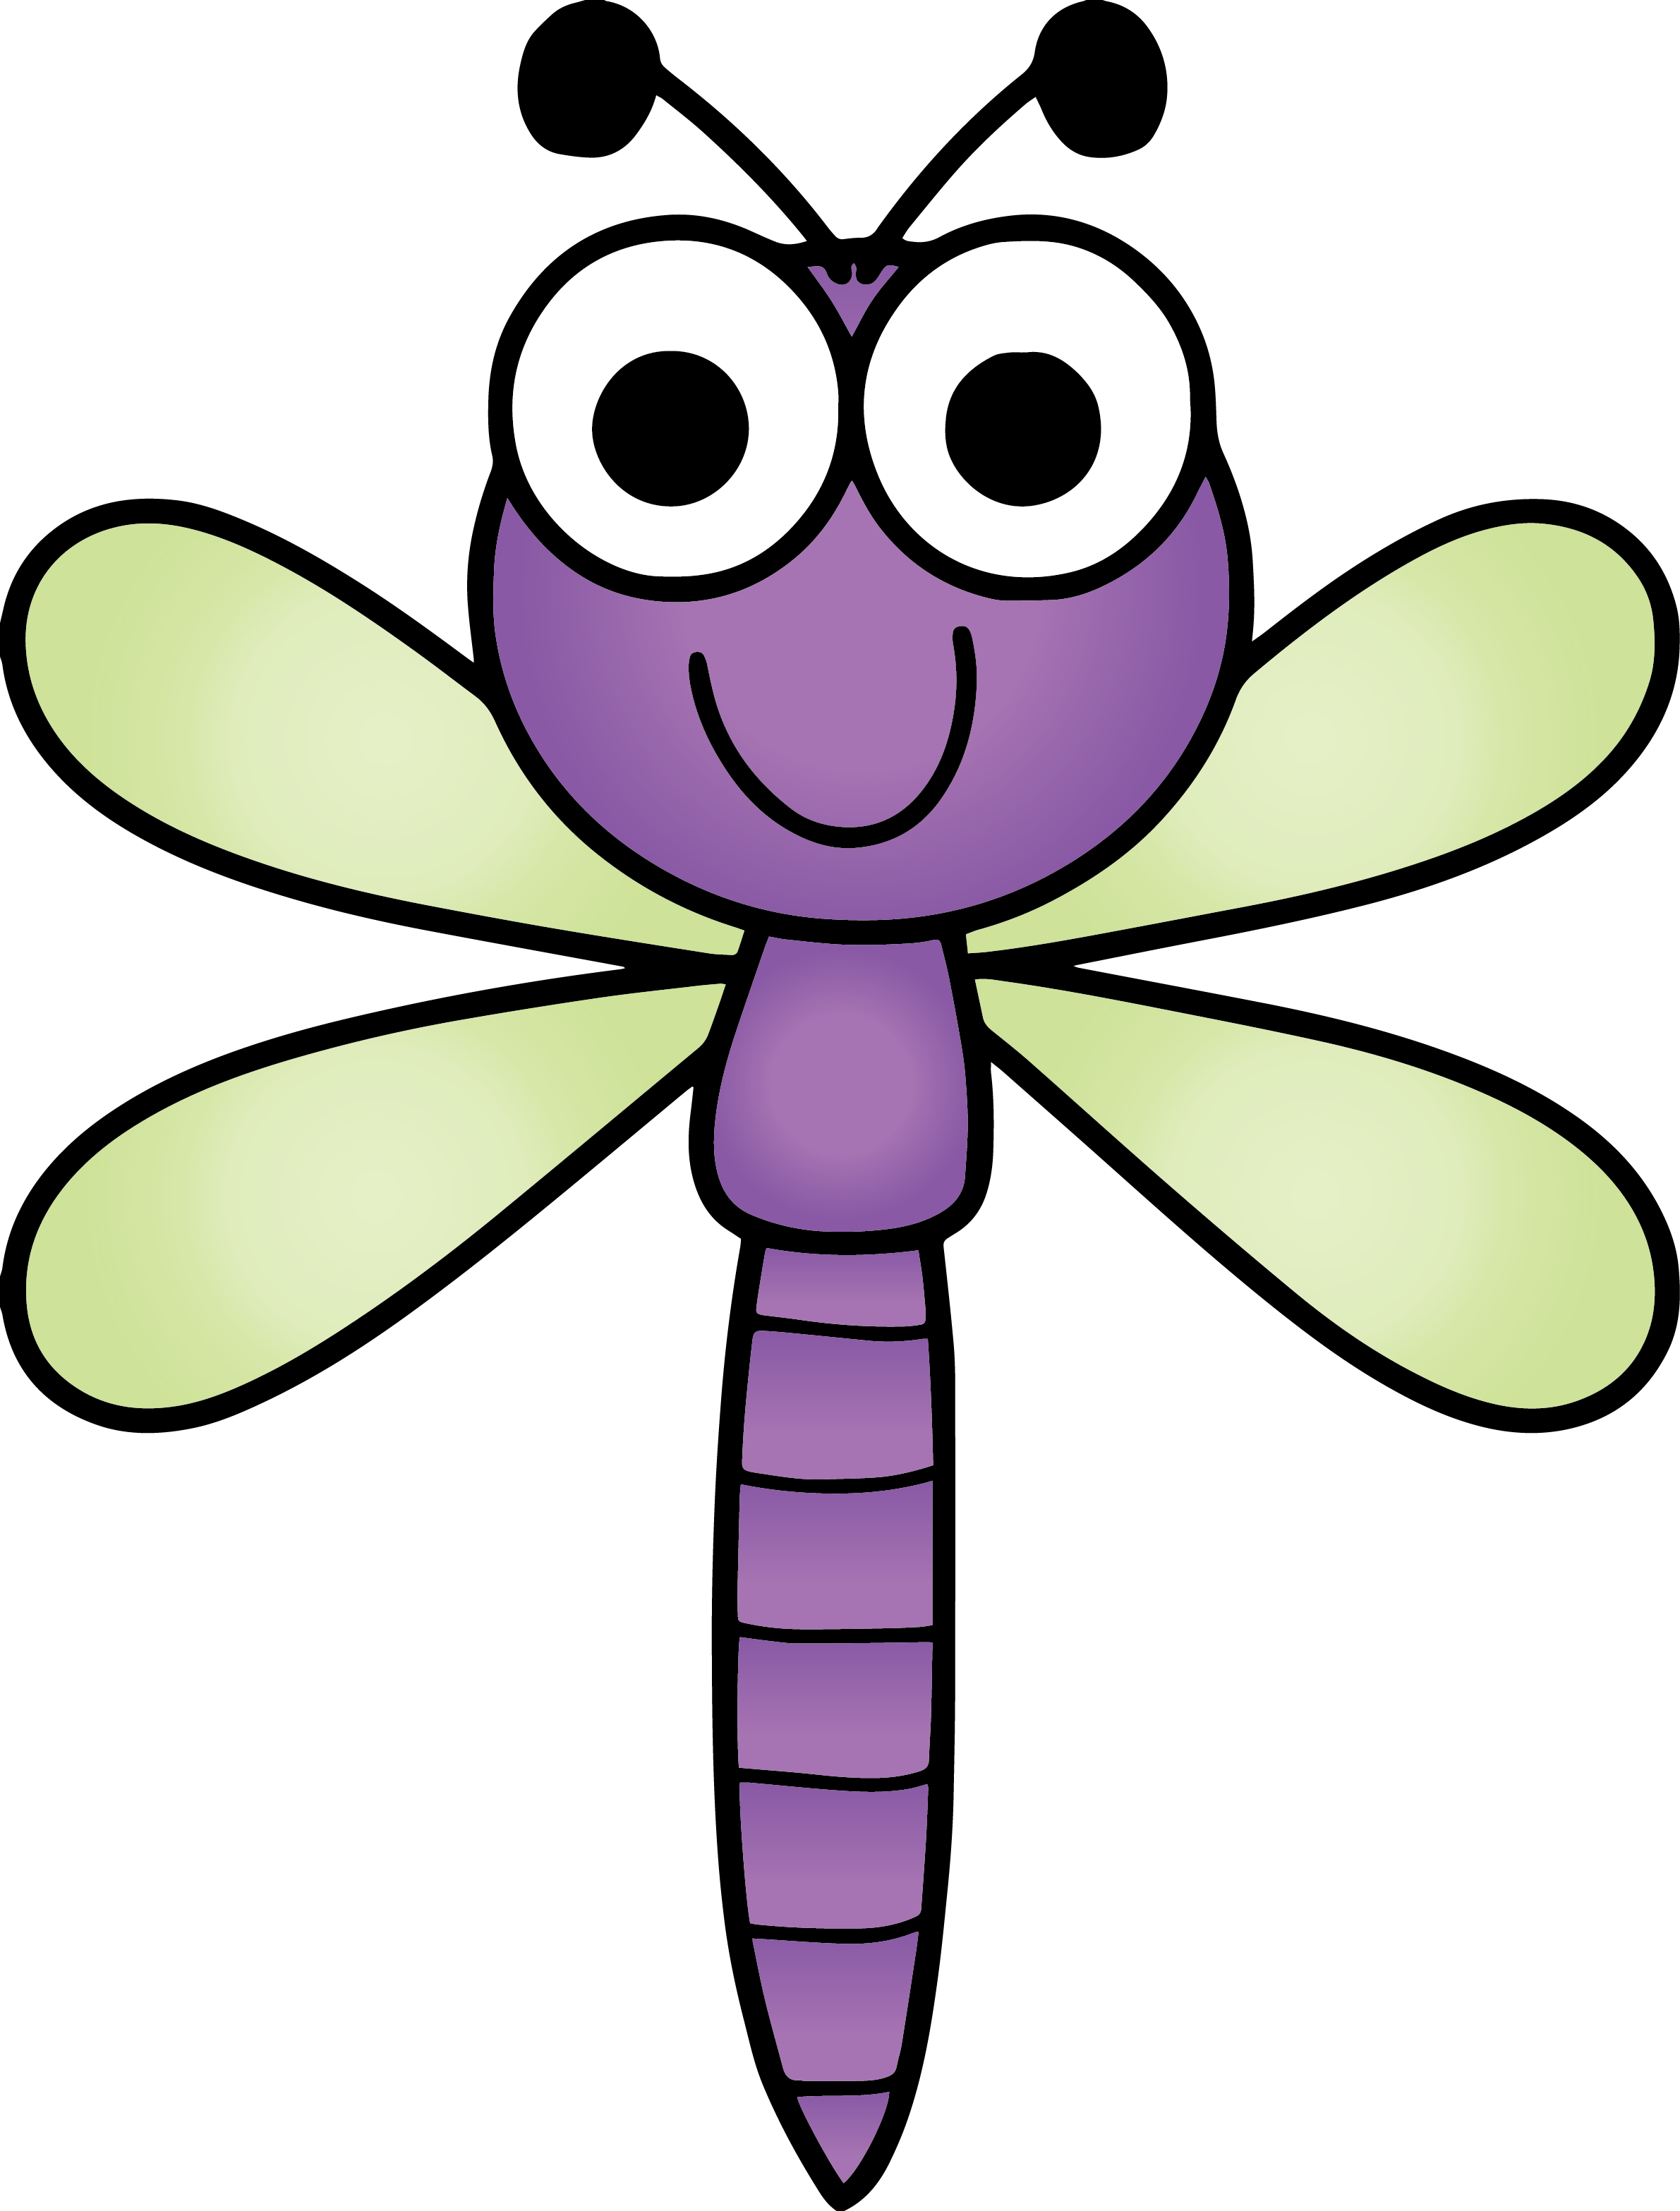 Mosquito clipart animated. Dragonfly birthday free on